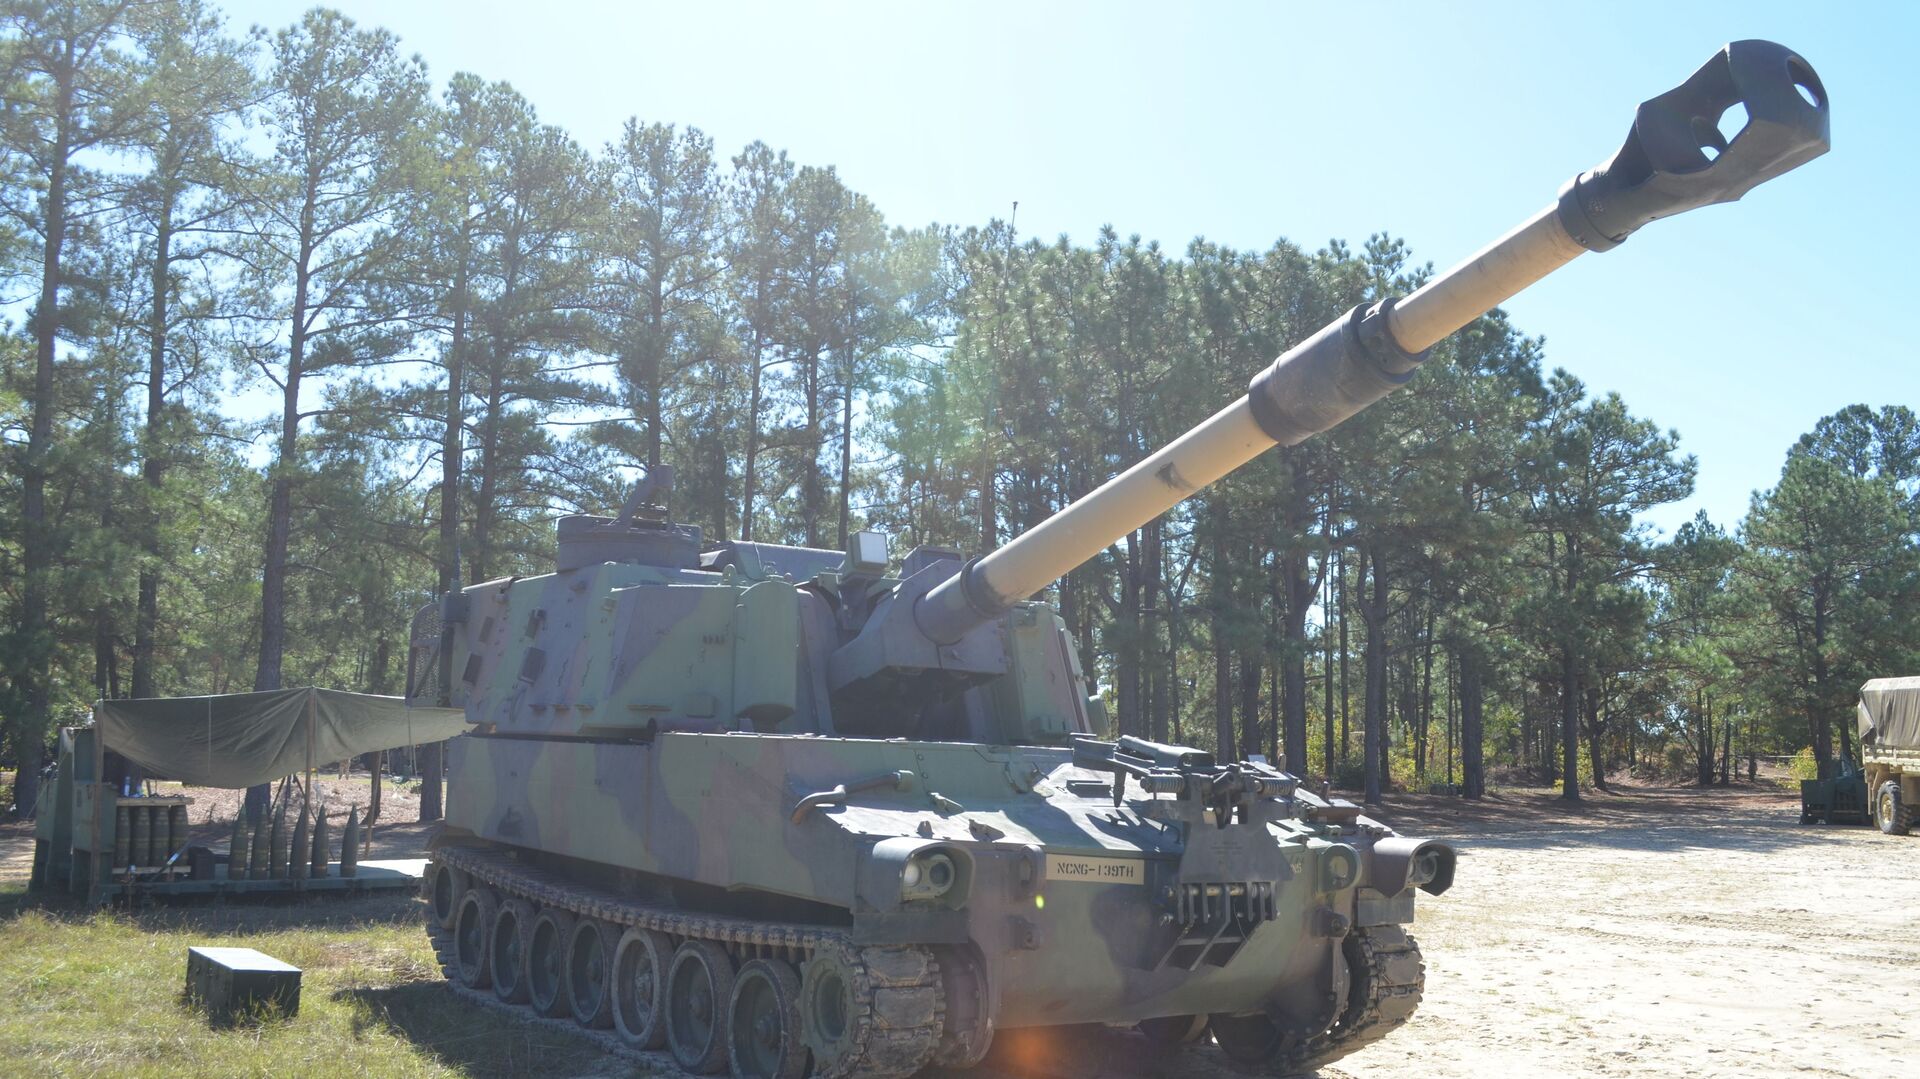 The M109 Paladin Self-Propelled Howitzer standing ready deep in the southern training areas at Fort Bragg. Nine National Guard troops from North and South Carolina, Florida, Georgia, Mississippi, Illinois and New Jersey are attending the 13 Bravo artillery military occupational specialty (MOS) reclassification course and will learn how to be a crew member on the three main “cannon” artillery weapons systems in the U.S. Army: The M119A3 105mm light towed howitzer, M777A2 155mm medium towed howitzer and the M109A6 Paladin 155mm self-propelled howitzer. Over the course of two days in the field, students will fire hundreds of rounds from all three weapons. - Sputnik International, 1920, 02.05.2022